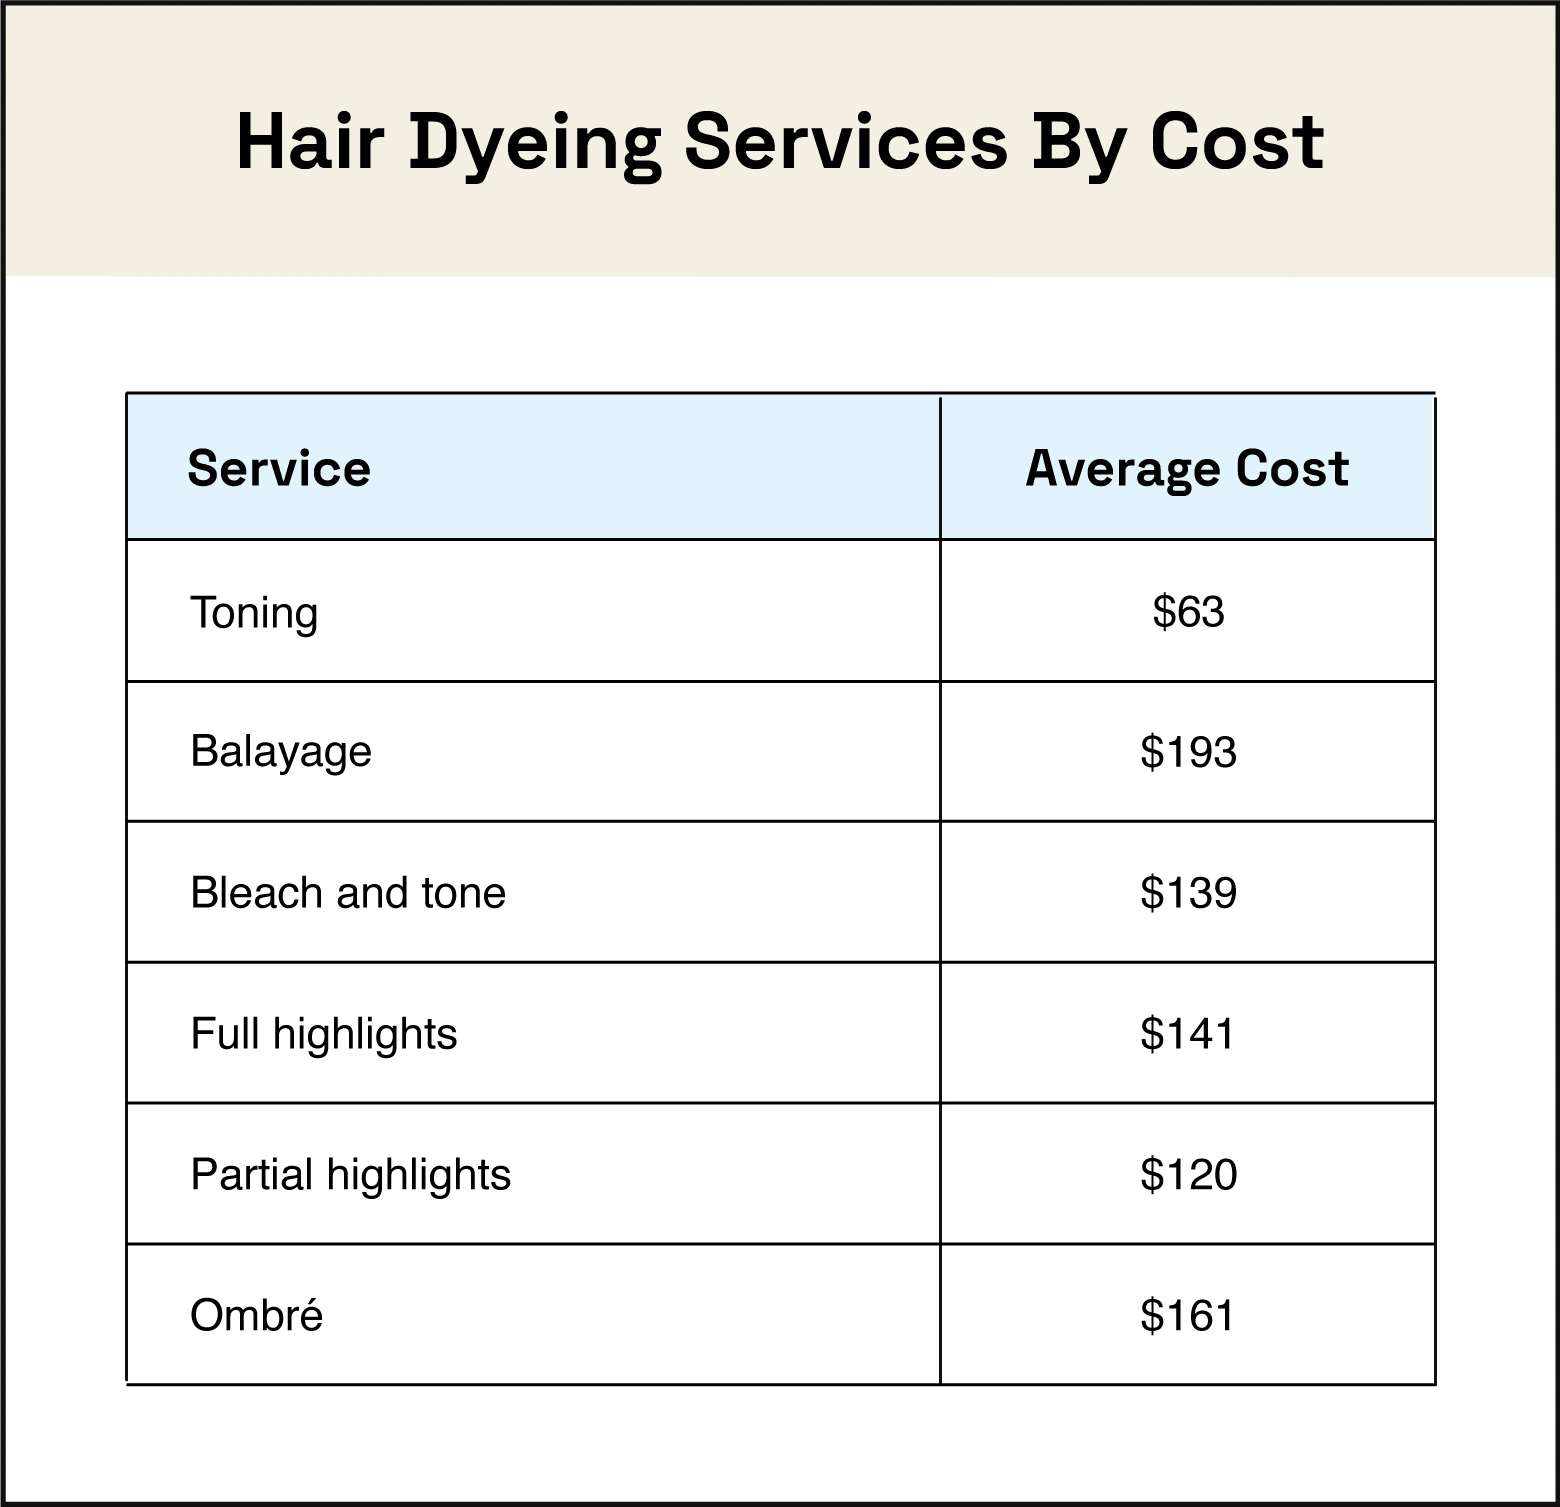 Chart displaying the average cost of hair dyeing services.